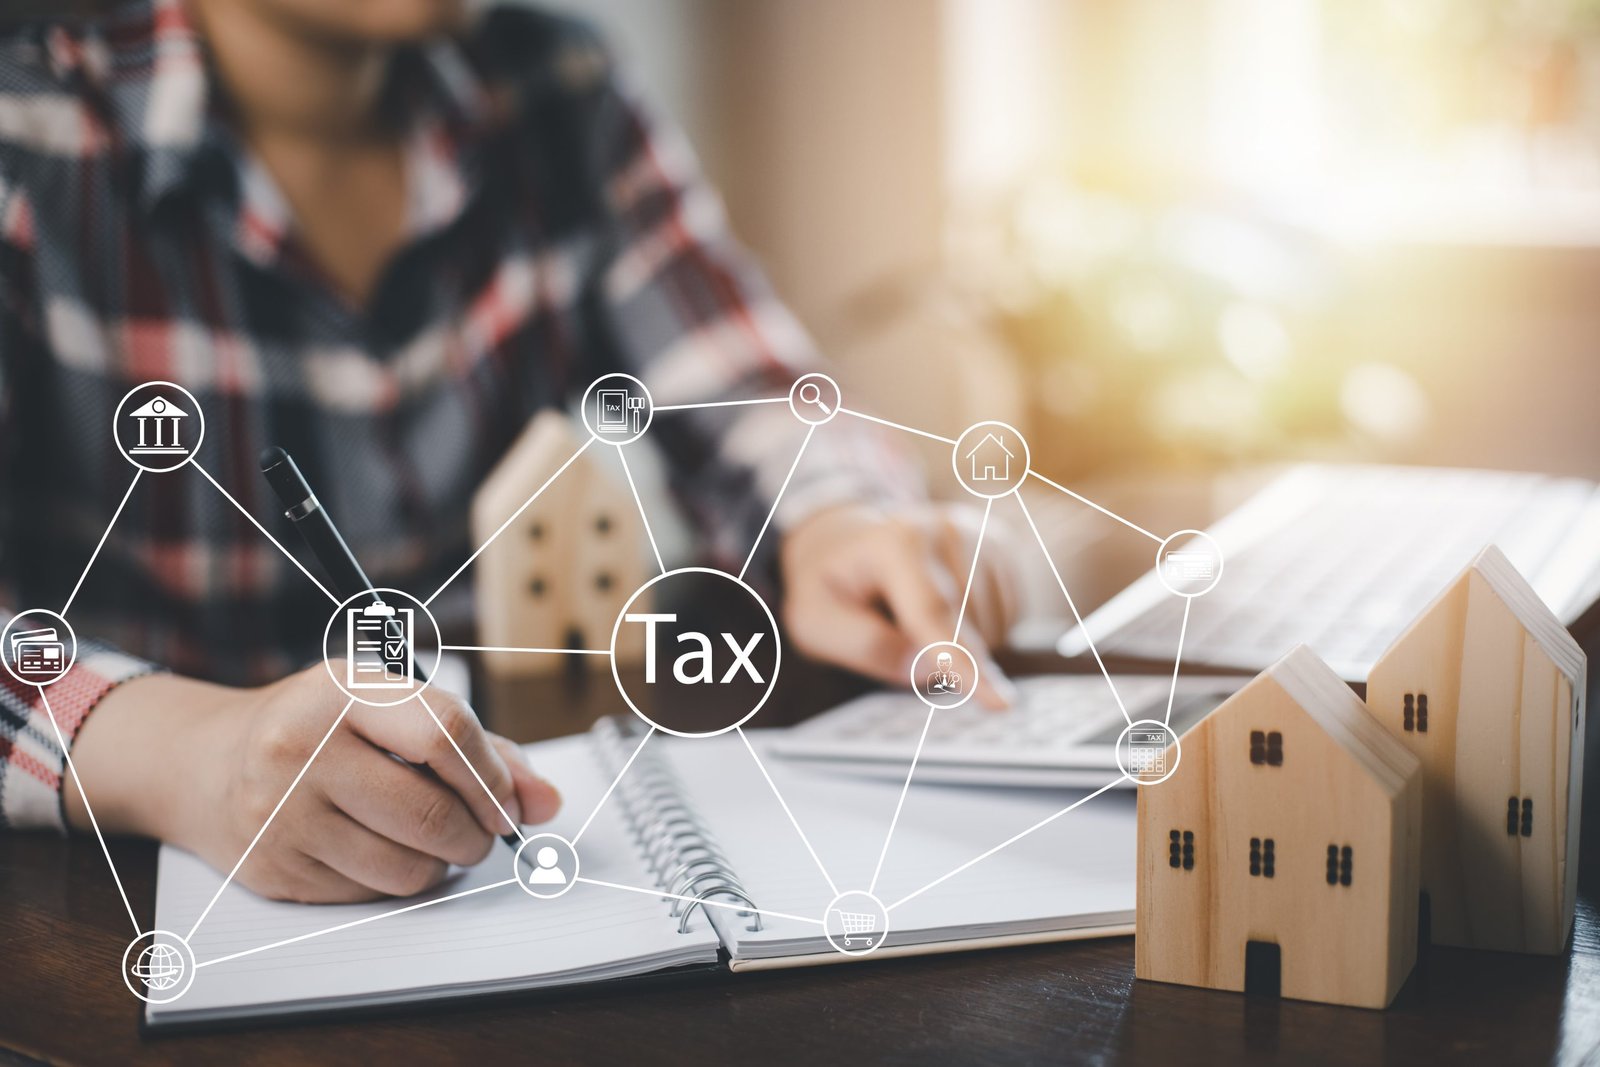 A Complete Guide on Self-Assessment Tax Return for holding the UK Property